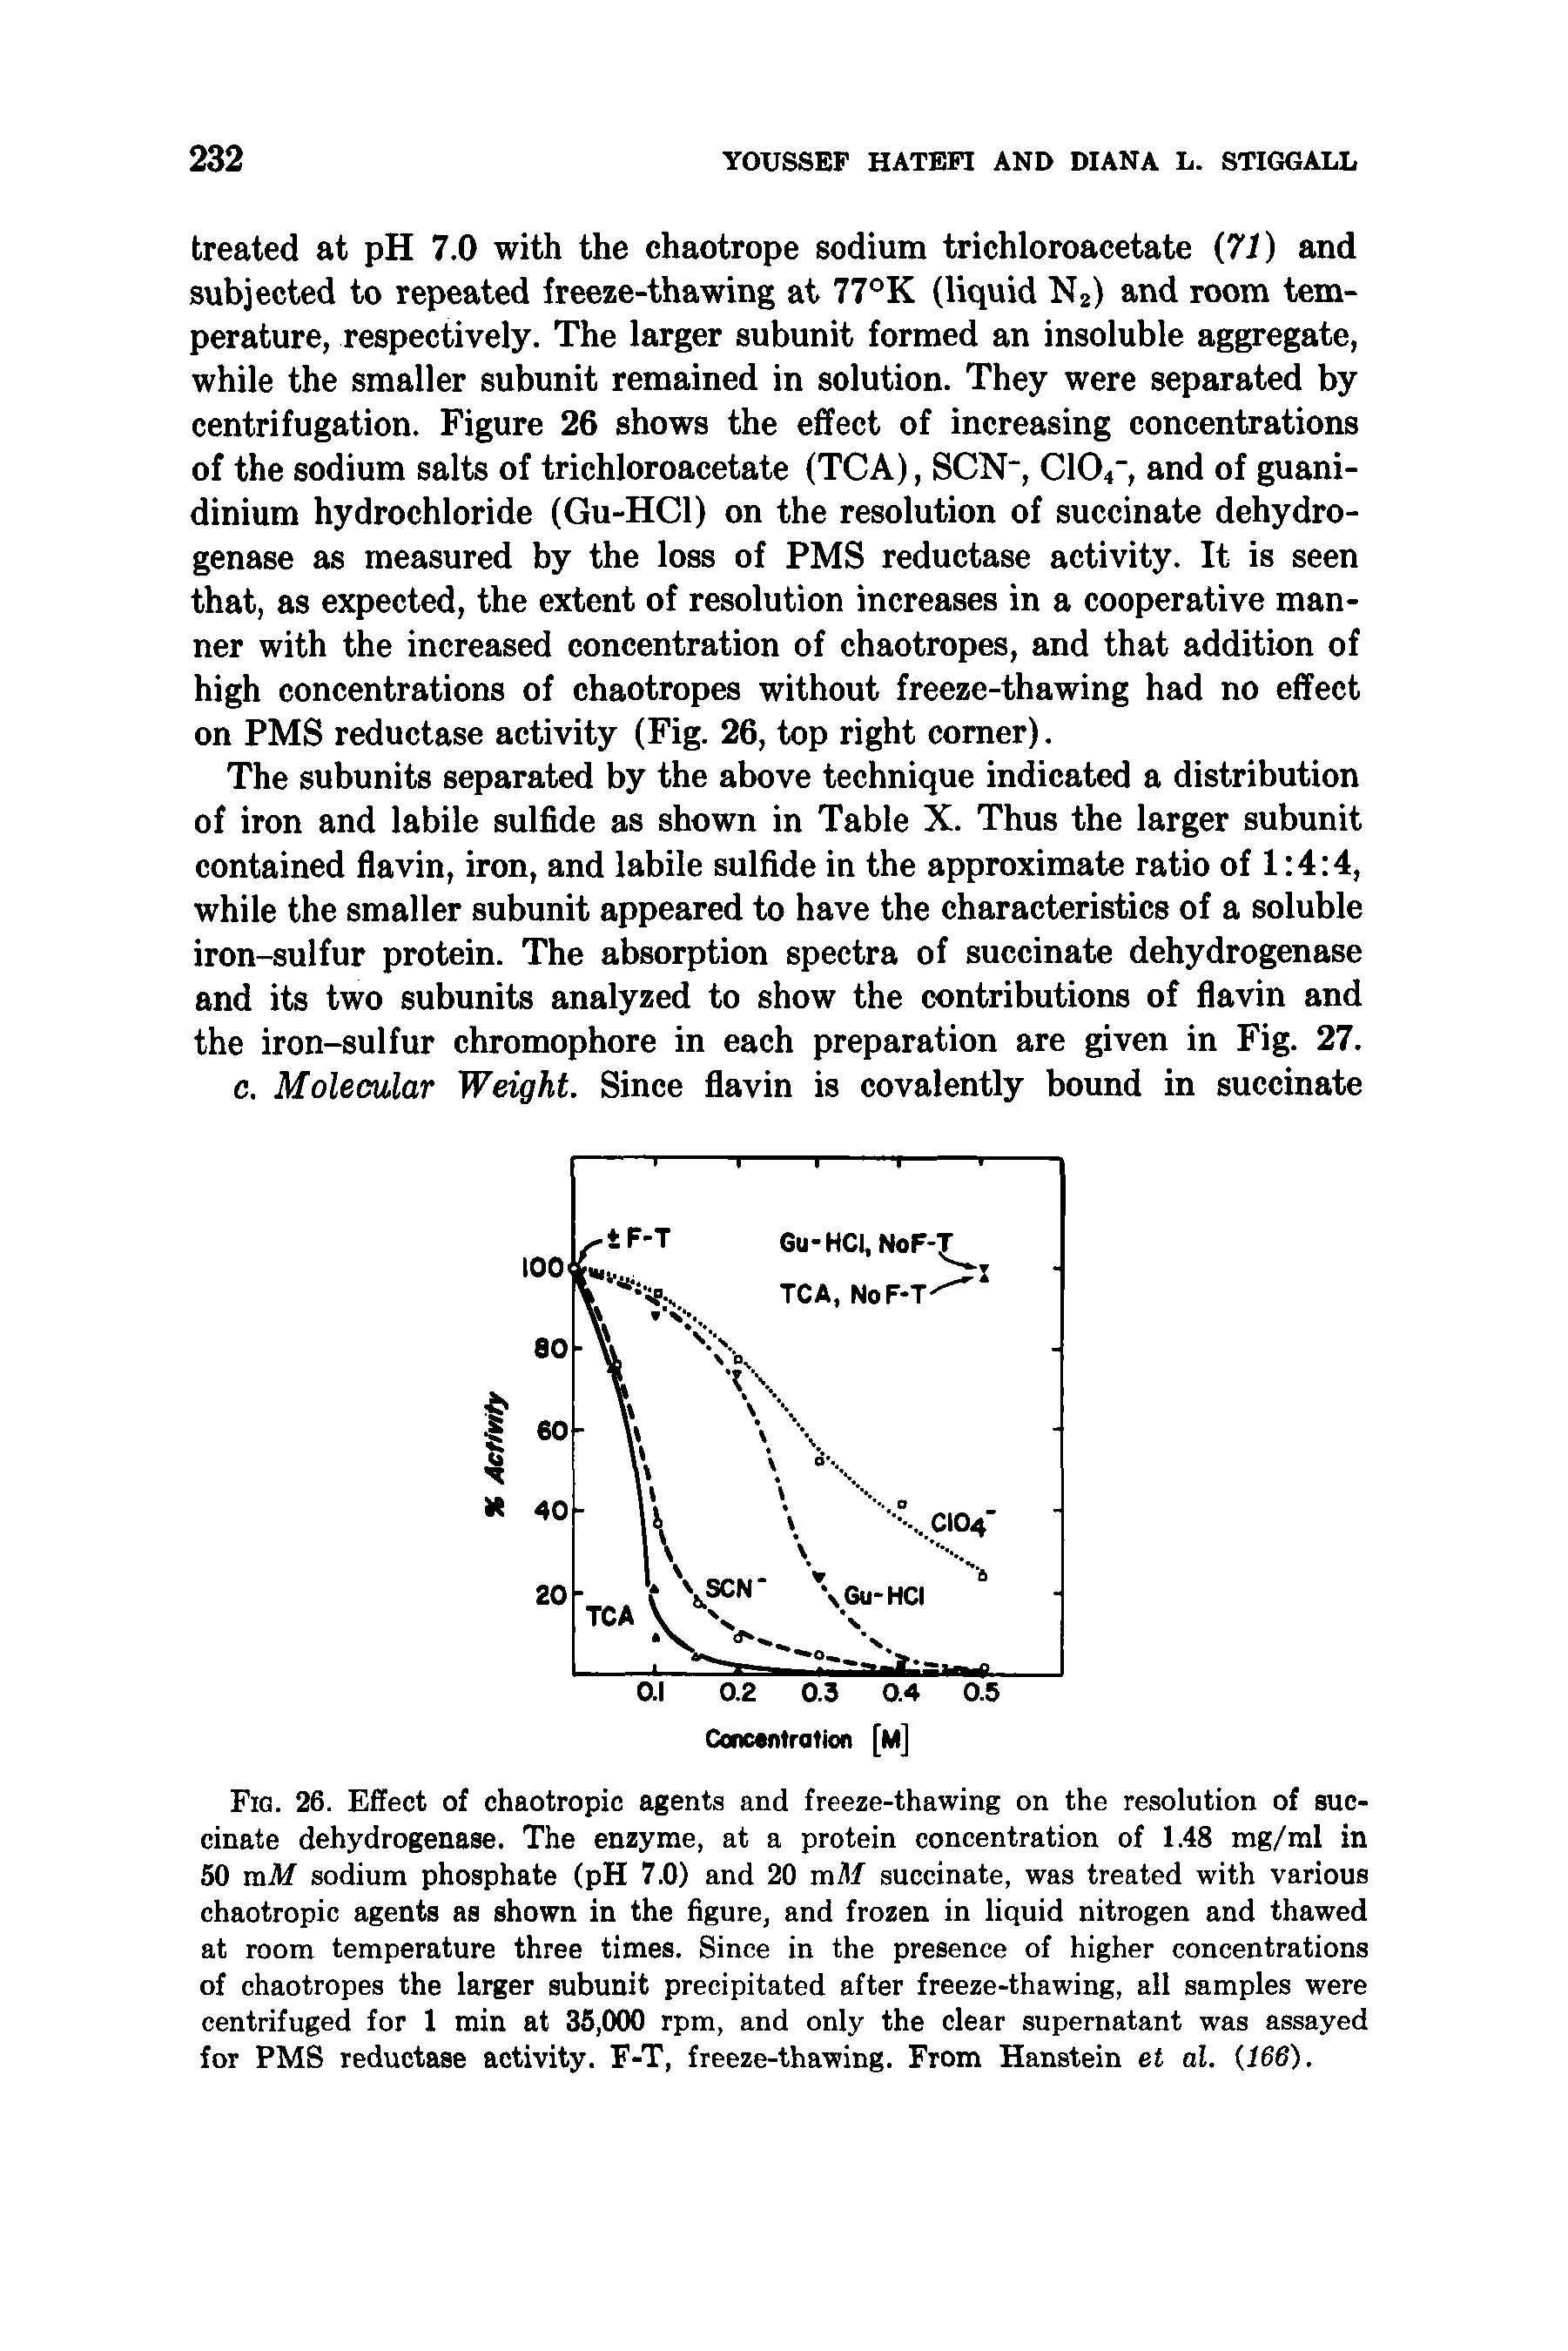 Fig. 26. Effect of chaotropic agents and freeze-thawing on the resolution of succinate dehydrogenase. The enzyme, at a protein concentration of 1.48 mg/ml in 50 mM sodium phosphate (pH 7.0) and 20 mM succinate, was treated with various chaotropic agents as shown in the figure, and frozen in liquid nitrogen and thawed at room temperature three times. Since in the presence of higher concentrations of chaotropes the larger subunit precipitated after freeze-thawing, all samples were centrifuged for 1 min at 35,000 rpm, and only the clear supernatant was assayed for PMS reductase activity. F-T, freeze-thawing. From Hanstein et al. (166).